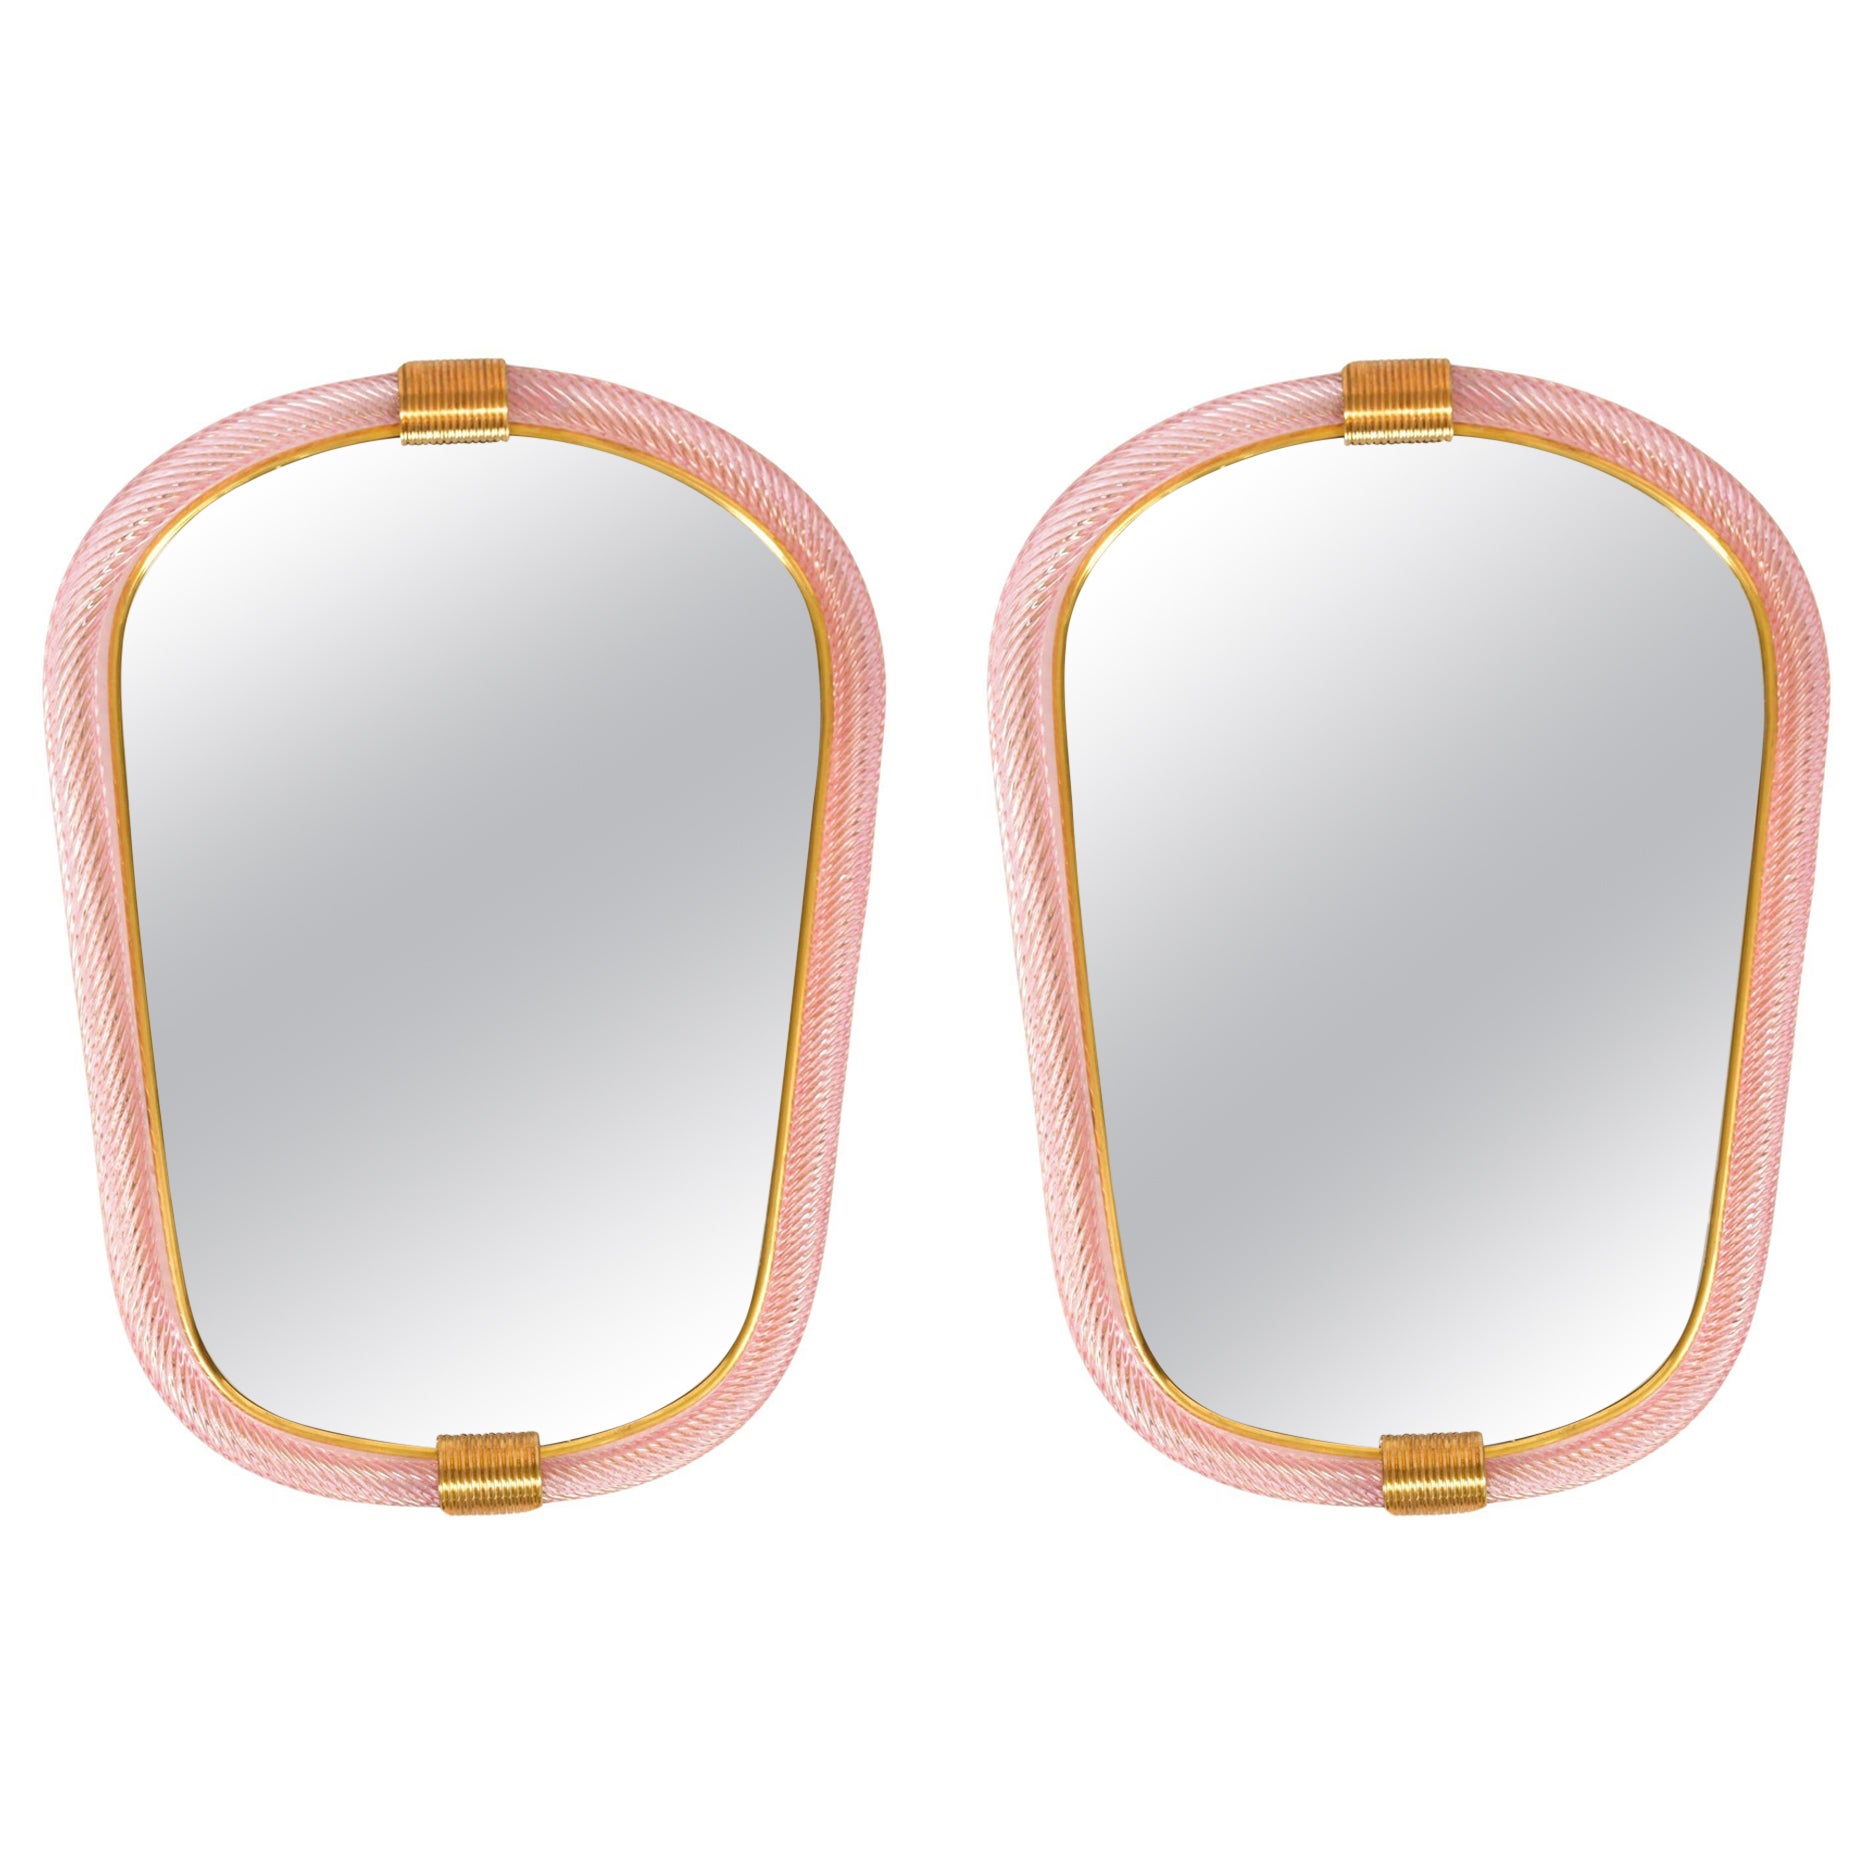 Pair of Murano pink Twisted Rope 'Firenze' Mirrors, Style of Barovier e Toso